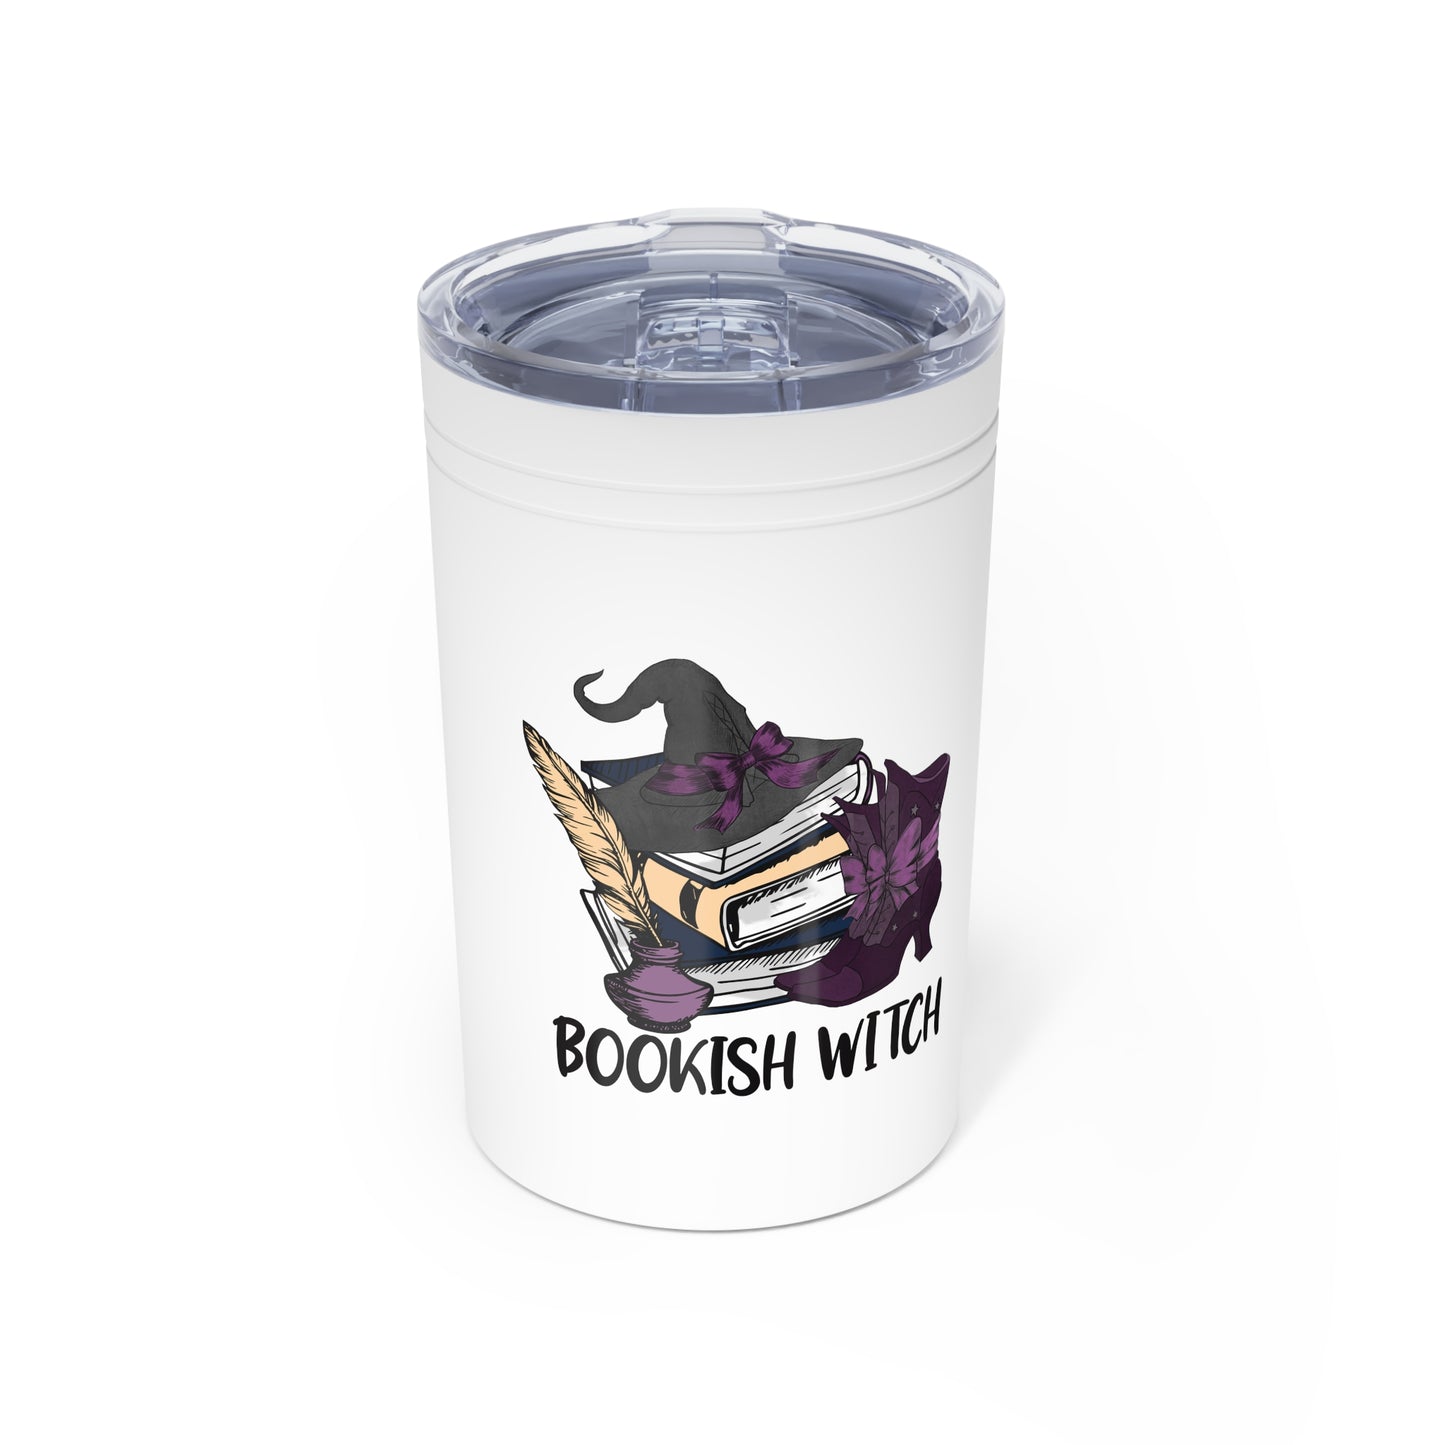 Bookish Witch - Vacuum Insulated Tumbler, 11oz